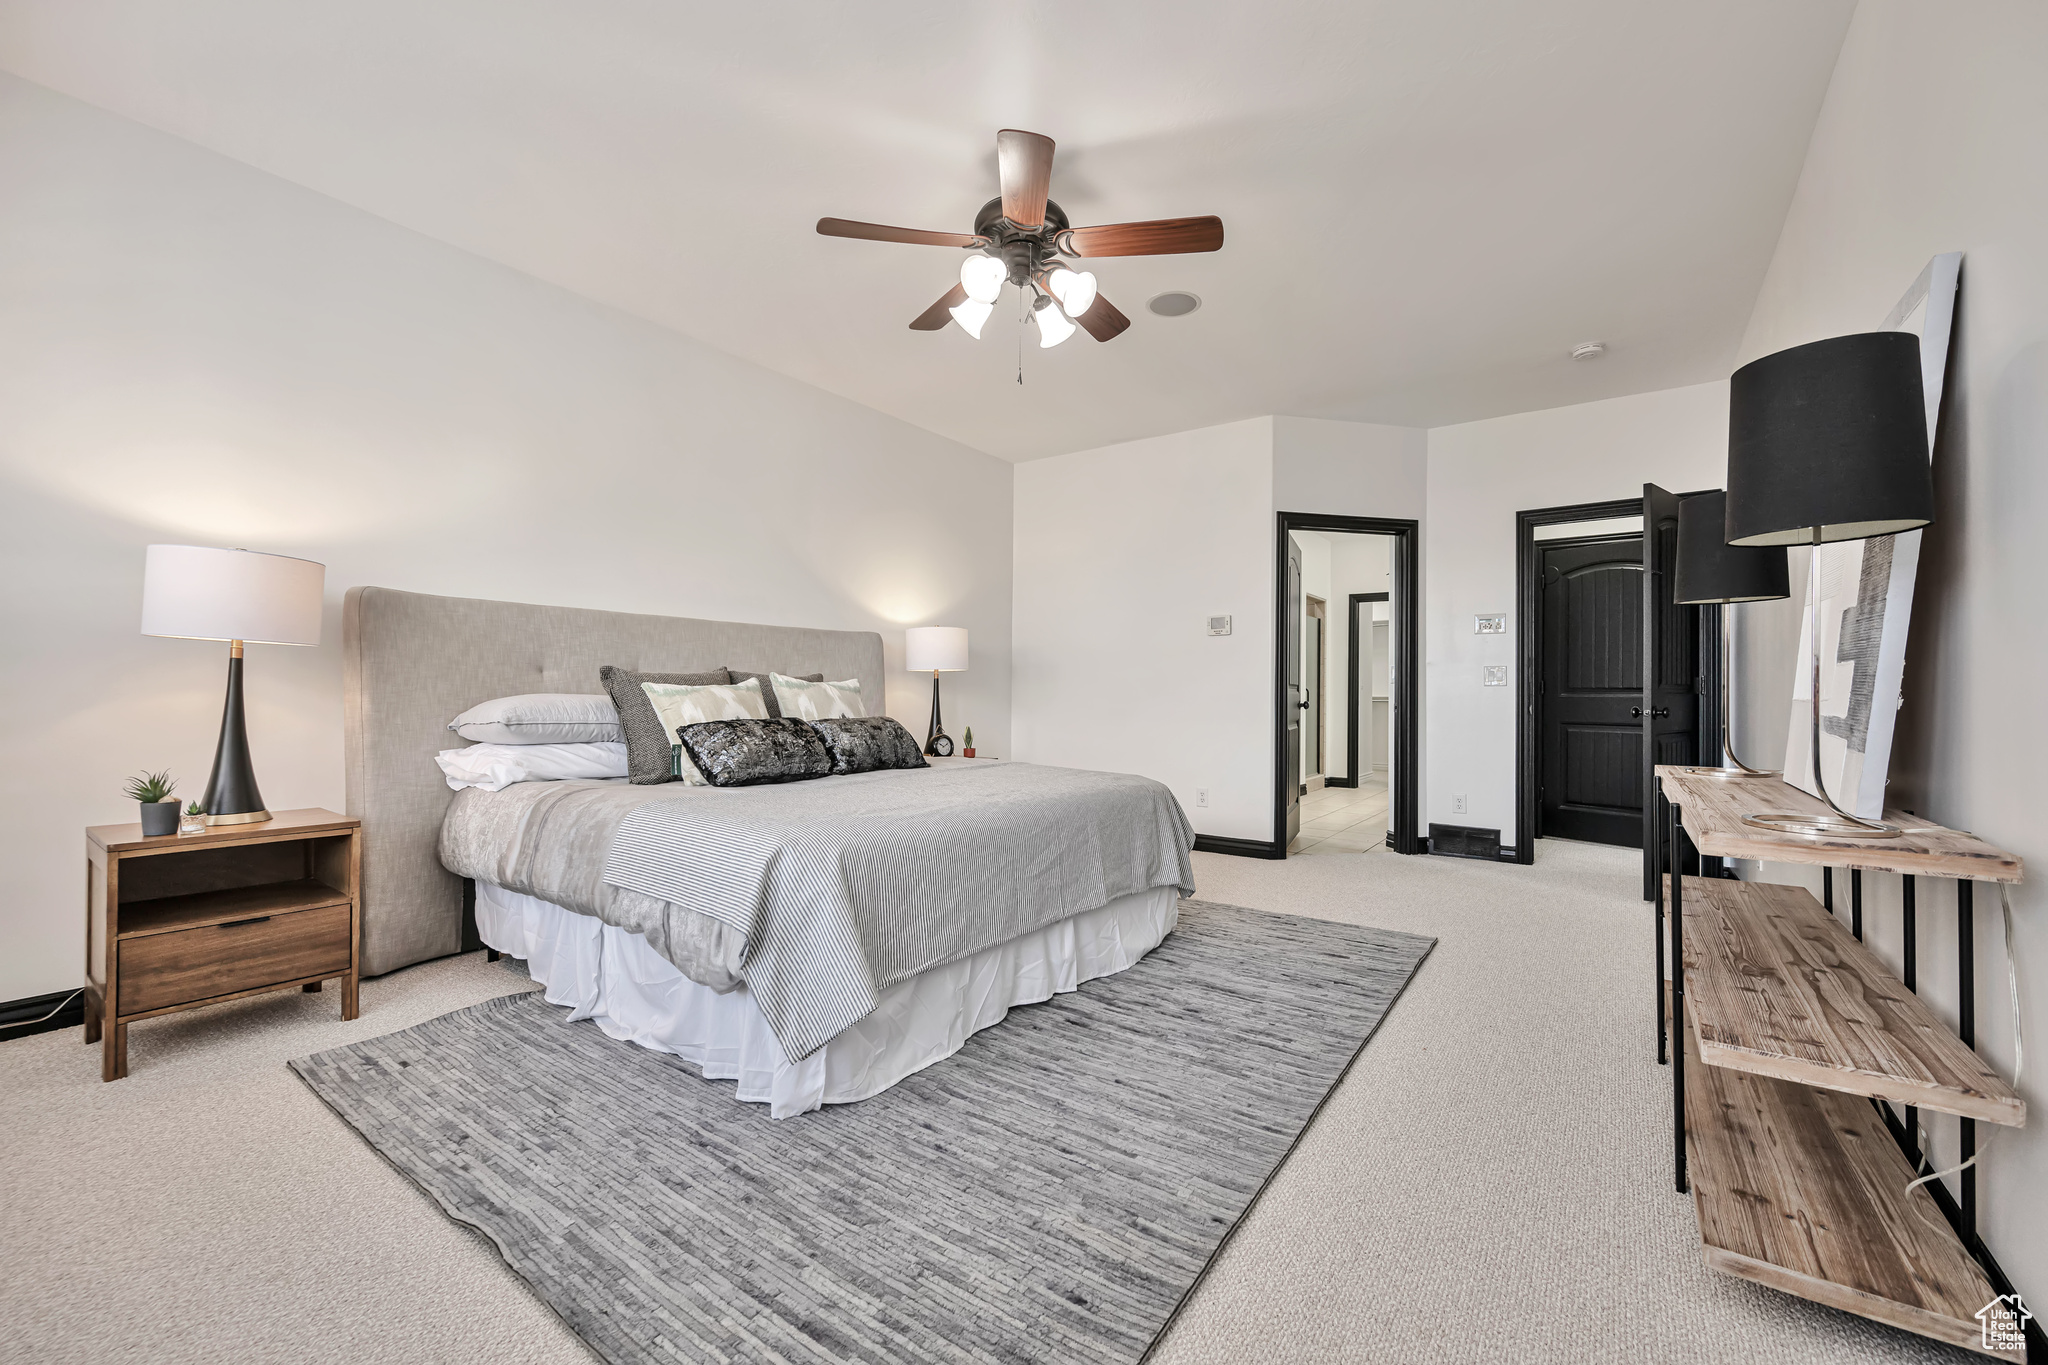 Large Principal Bedroom 1 featuring light colored carpet and ceiling fan, own bathroom and walk-in closet